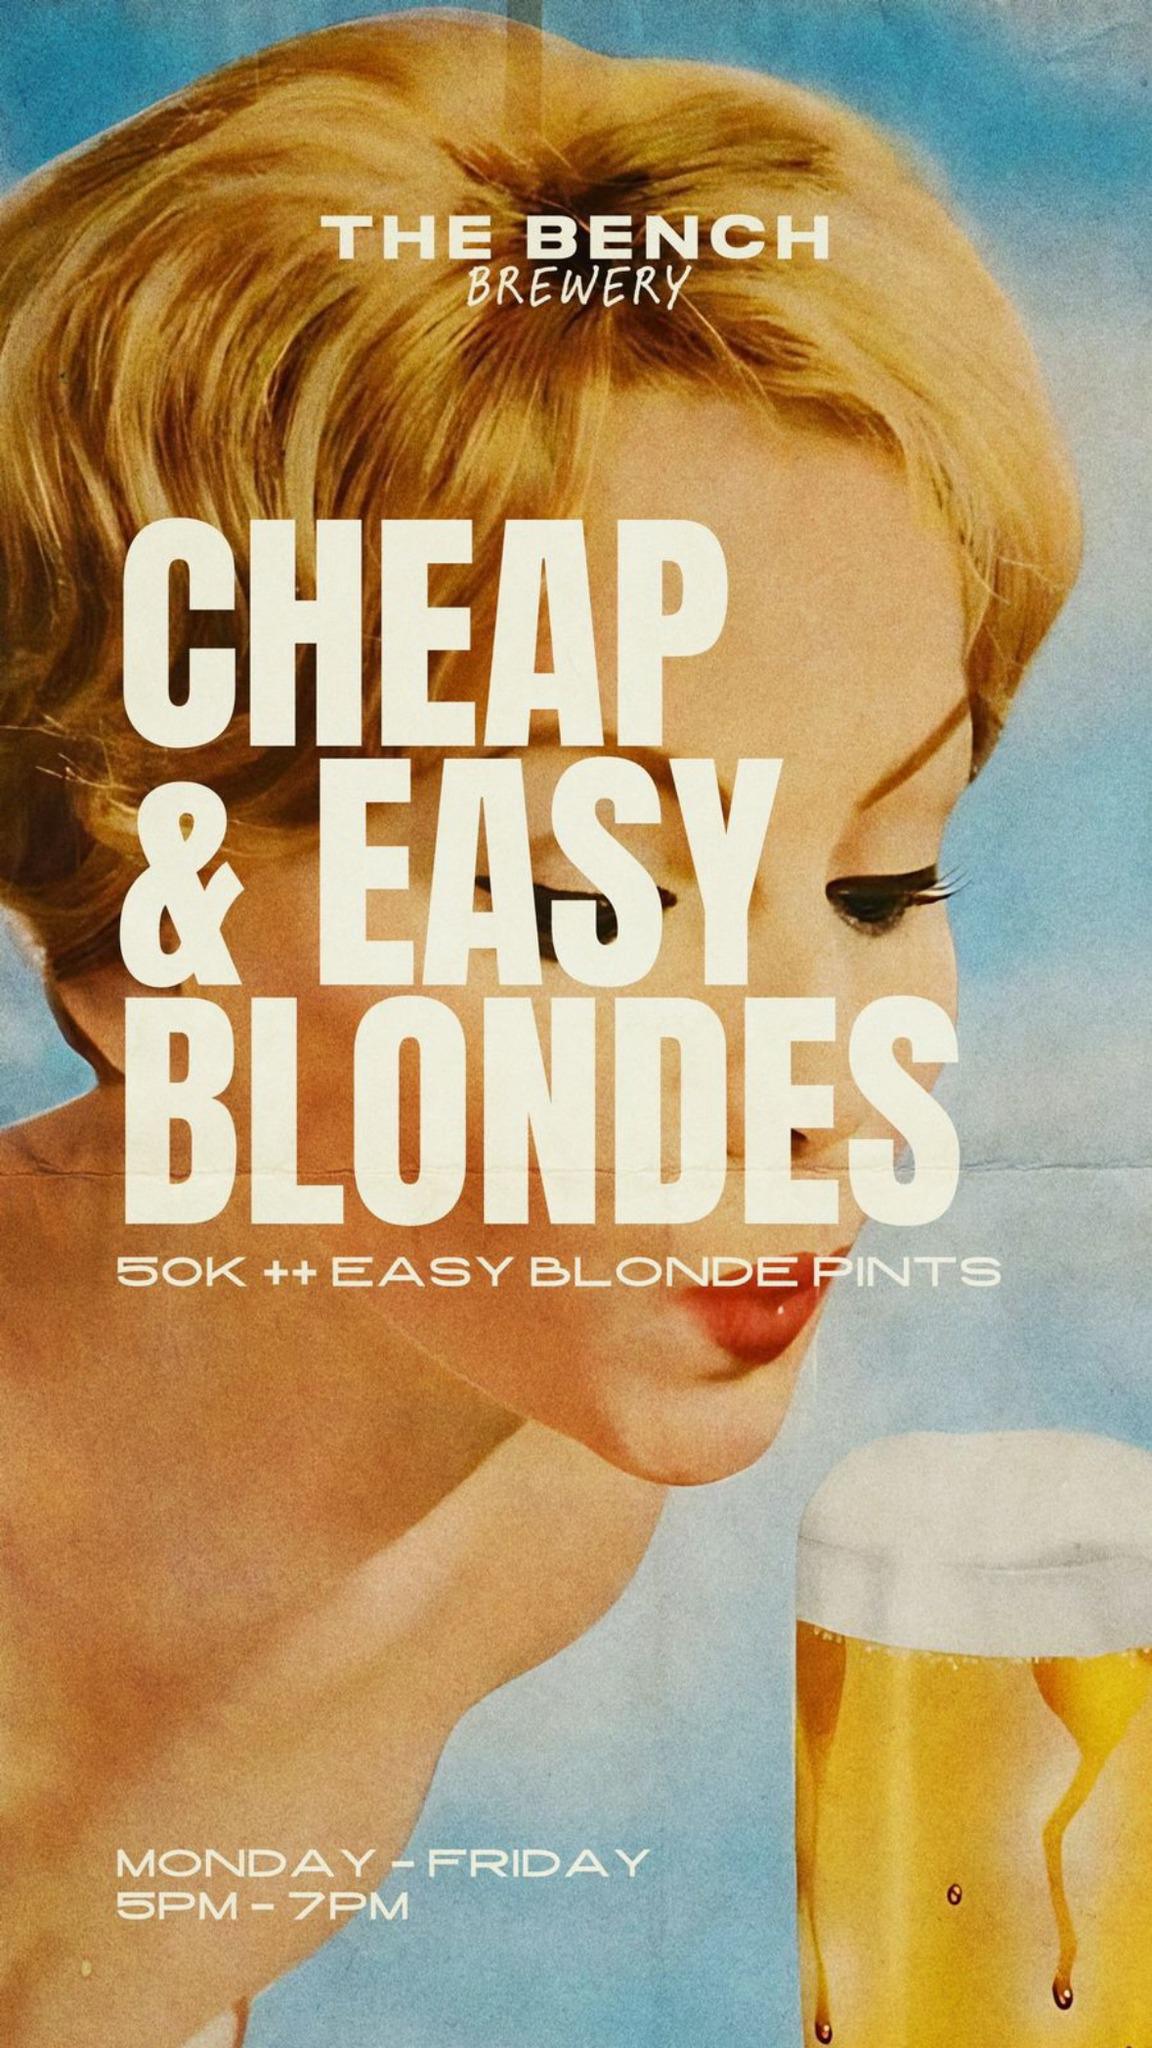 Cheap & Easy Blondes at The Bench Brewery 5-7pm